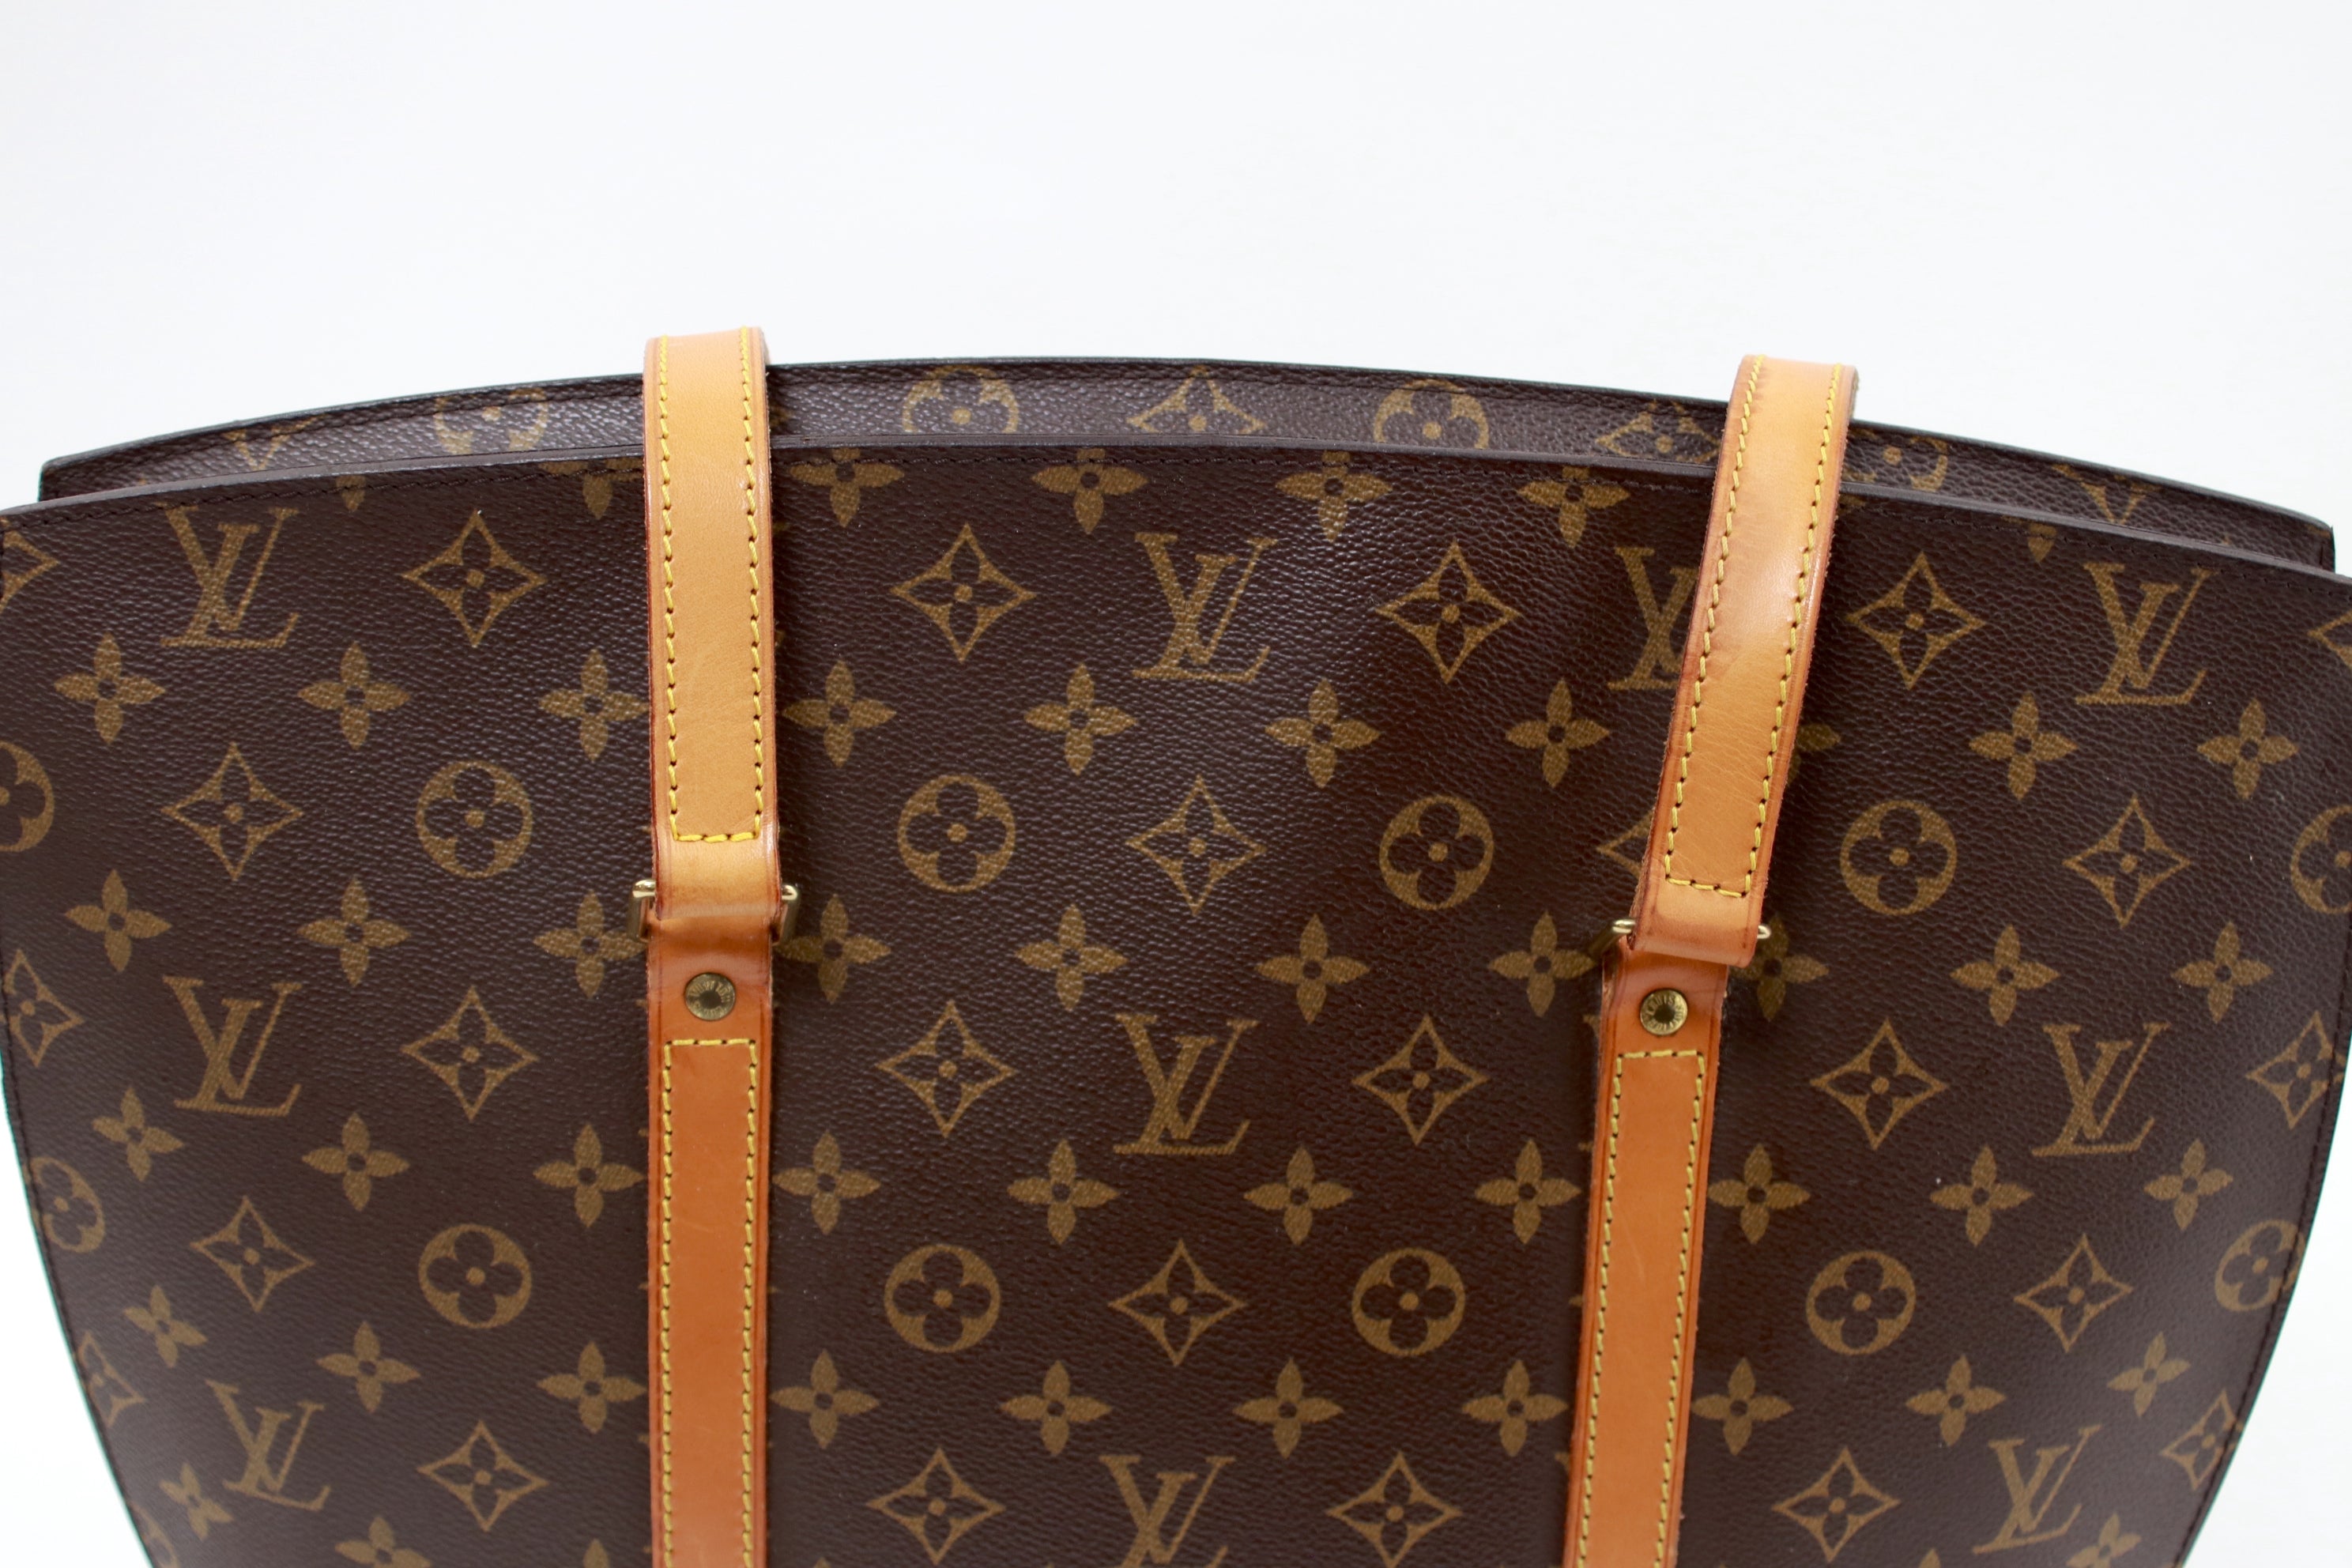 Louis Vuitton Babylone Tote Reviewed